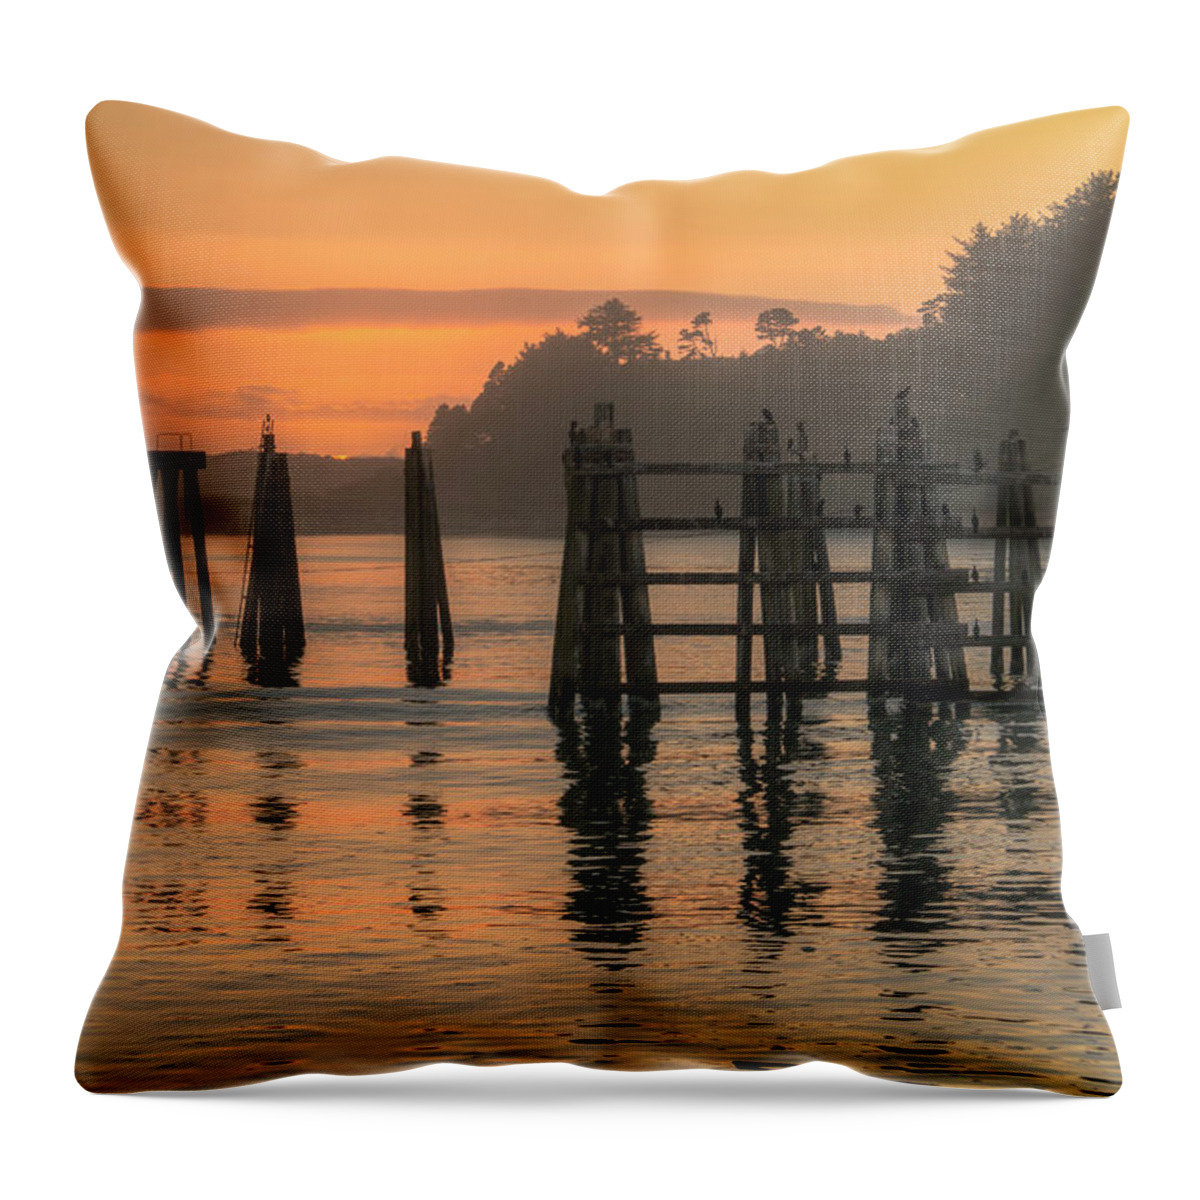 Evening Throw Pillow featuring the photograph Evening Reflections by Kristina Rinell